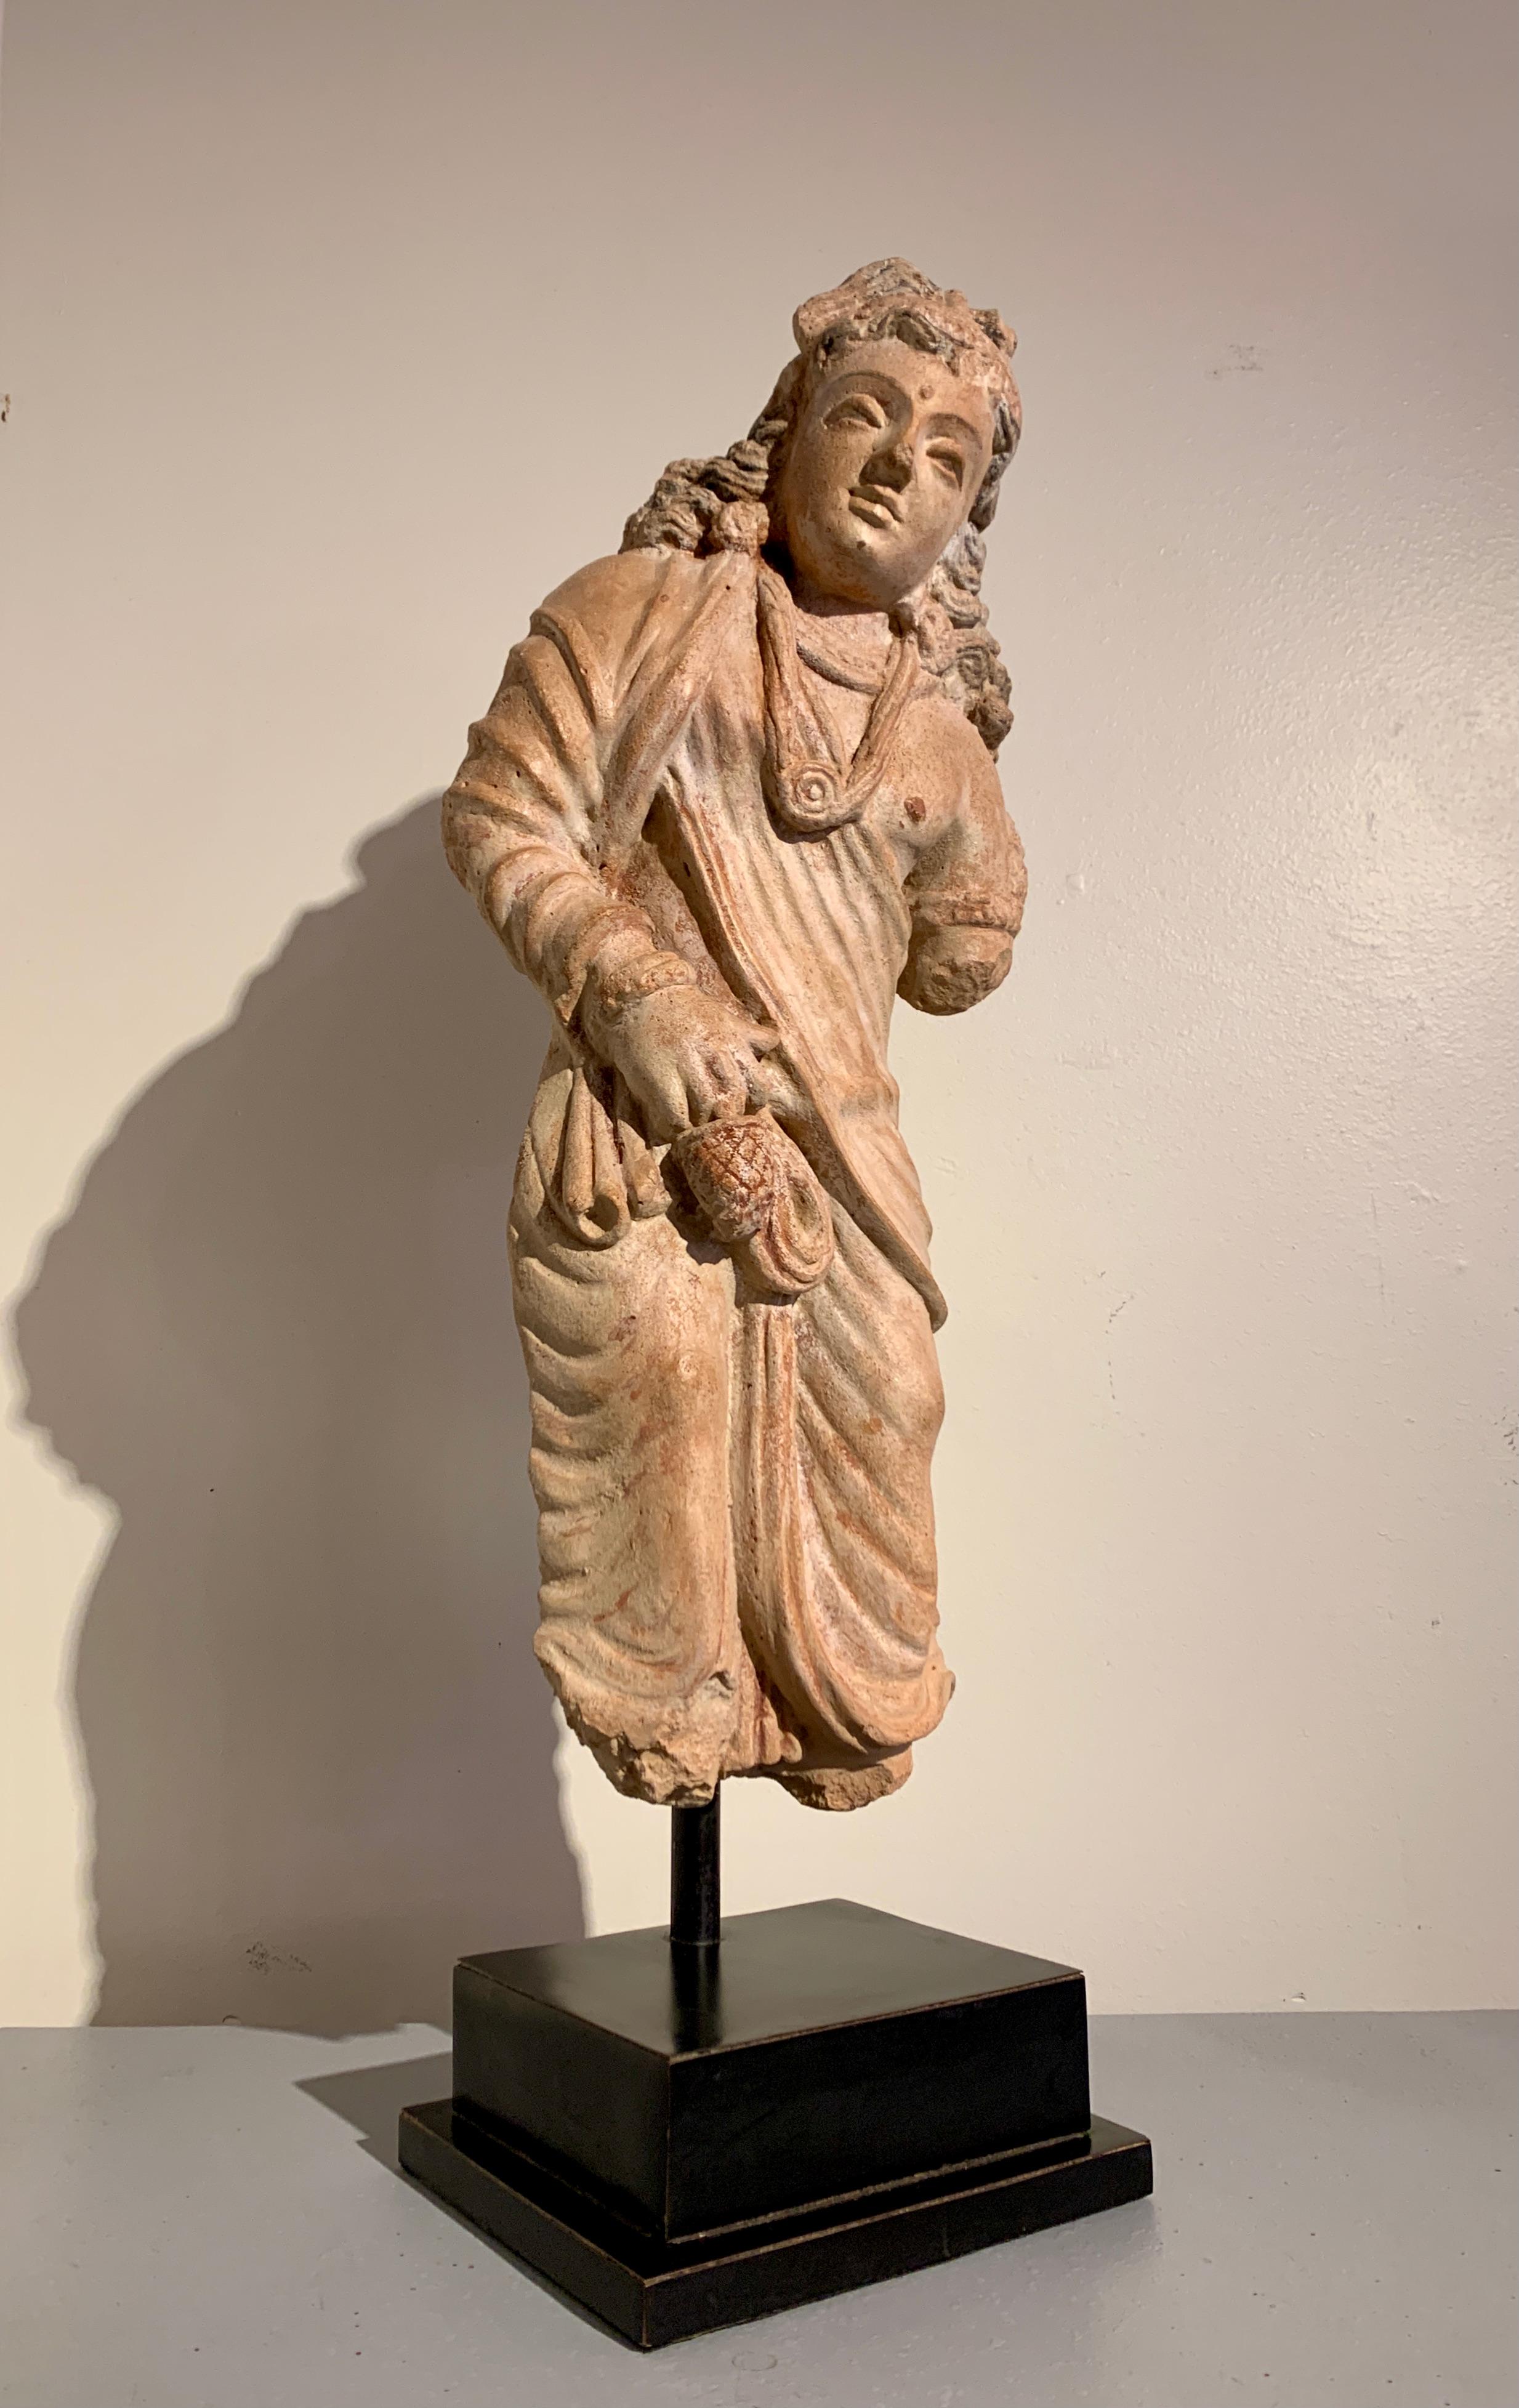 A very rare and decidedly charming half-scale terracotta sculpture of the bodhisattva Maitreya, the Buddha of the Future, ancient region of Gandhara, Kushan Period, 4th - 6th century.

Maitreya is portrayed as a regal, princely figure. He stands